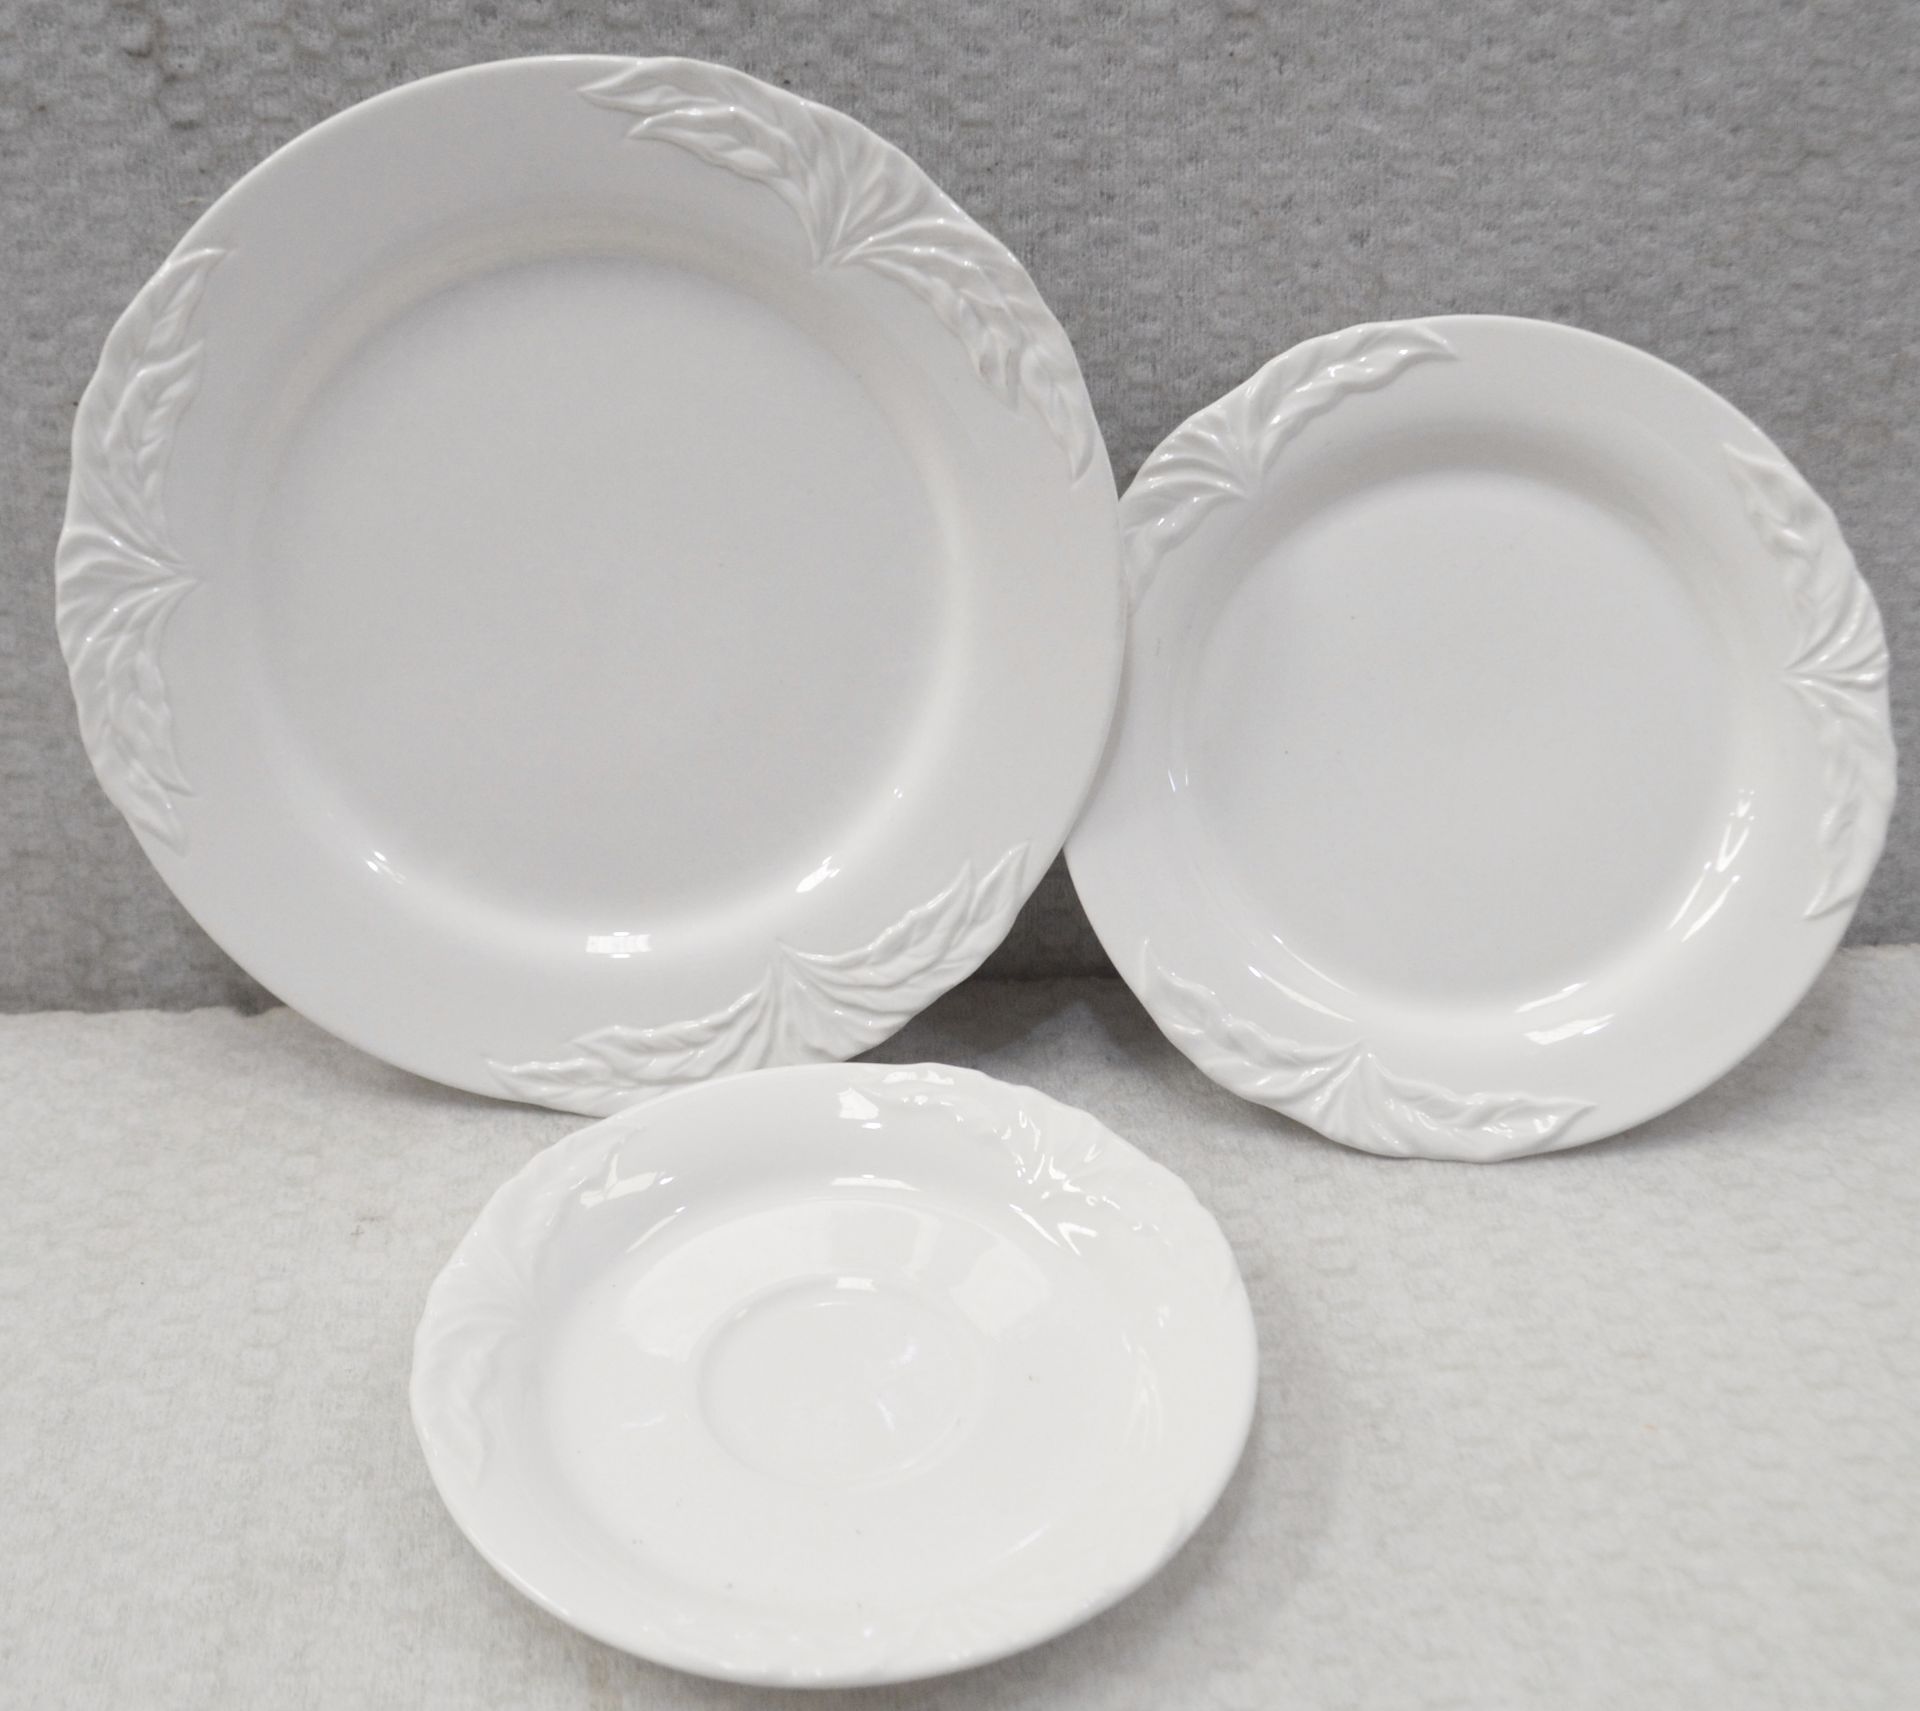 1 x Assorted Collection of Fourteen Villeroy & Boch Foglia Tea/Side/Bread & Butter Plates - Image 3 of 3